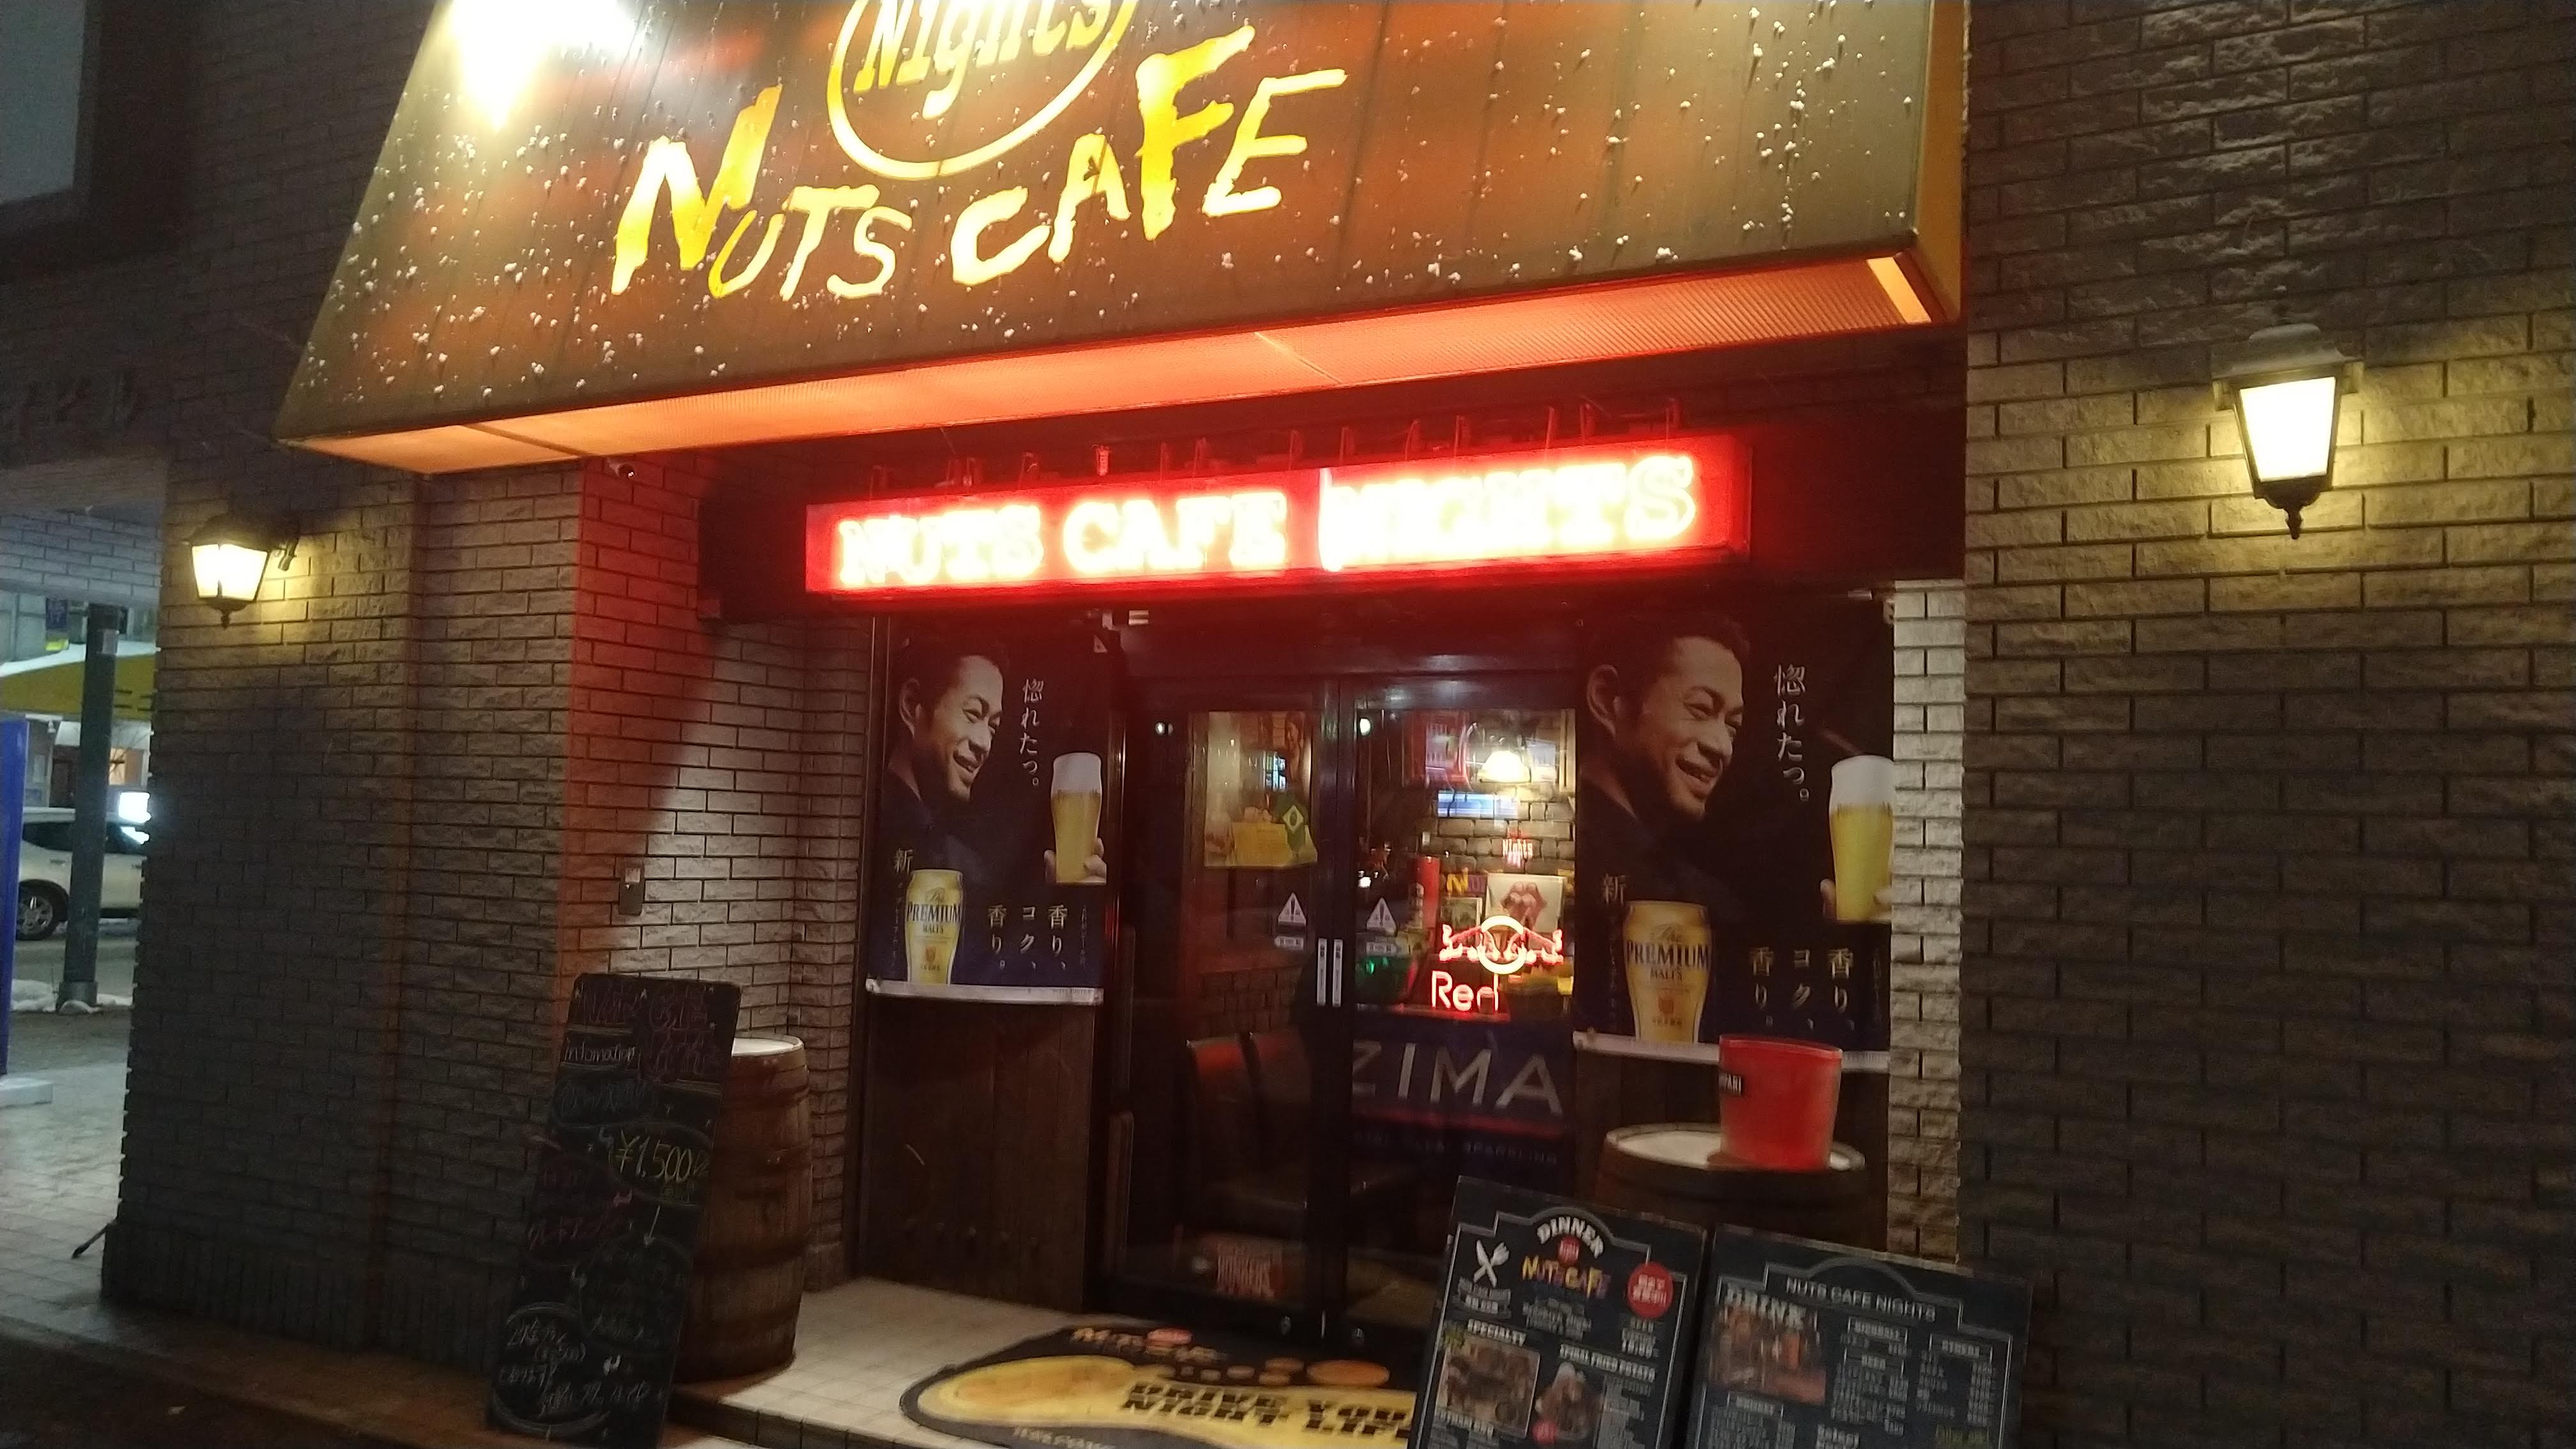 NUTS CAFE Nights